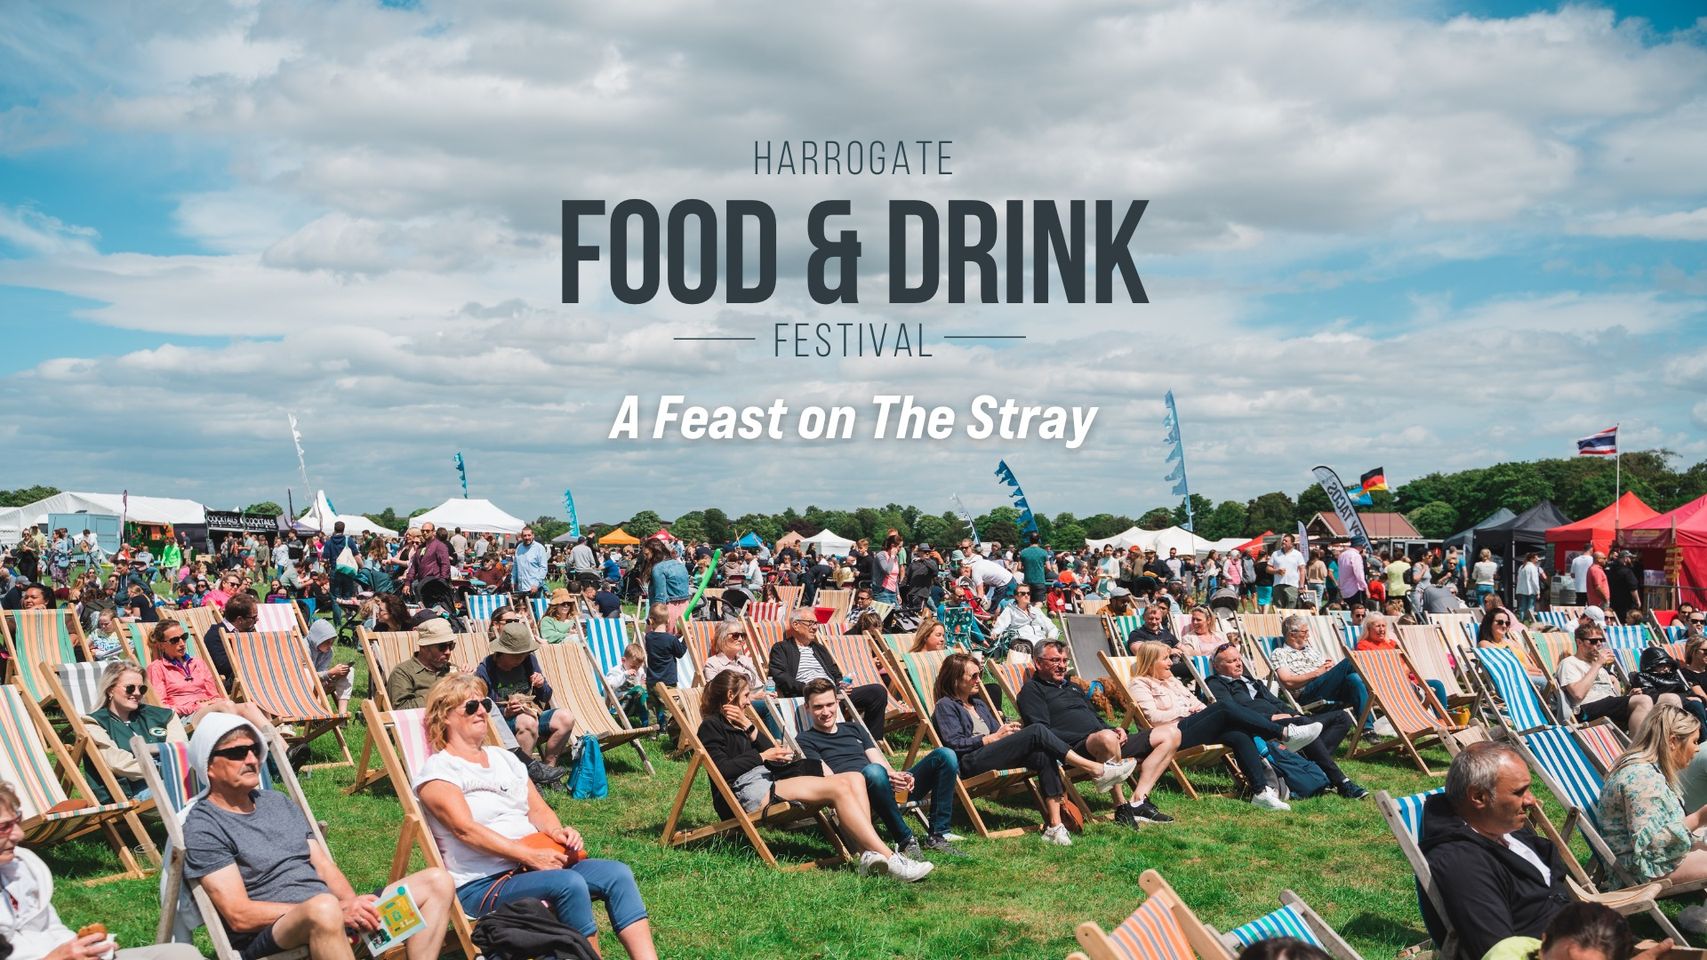 Image name harrogate food and drink festival on the stray yorkshire the 16 image from the post Harrogate Food & Drink Festival 2023: A Feast on The Stray in Yorkshire.com.